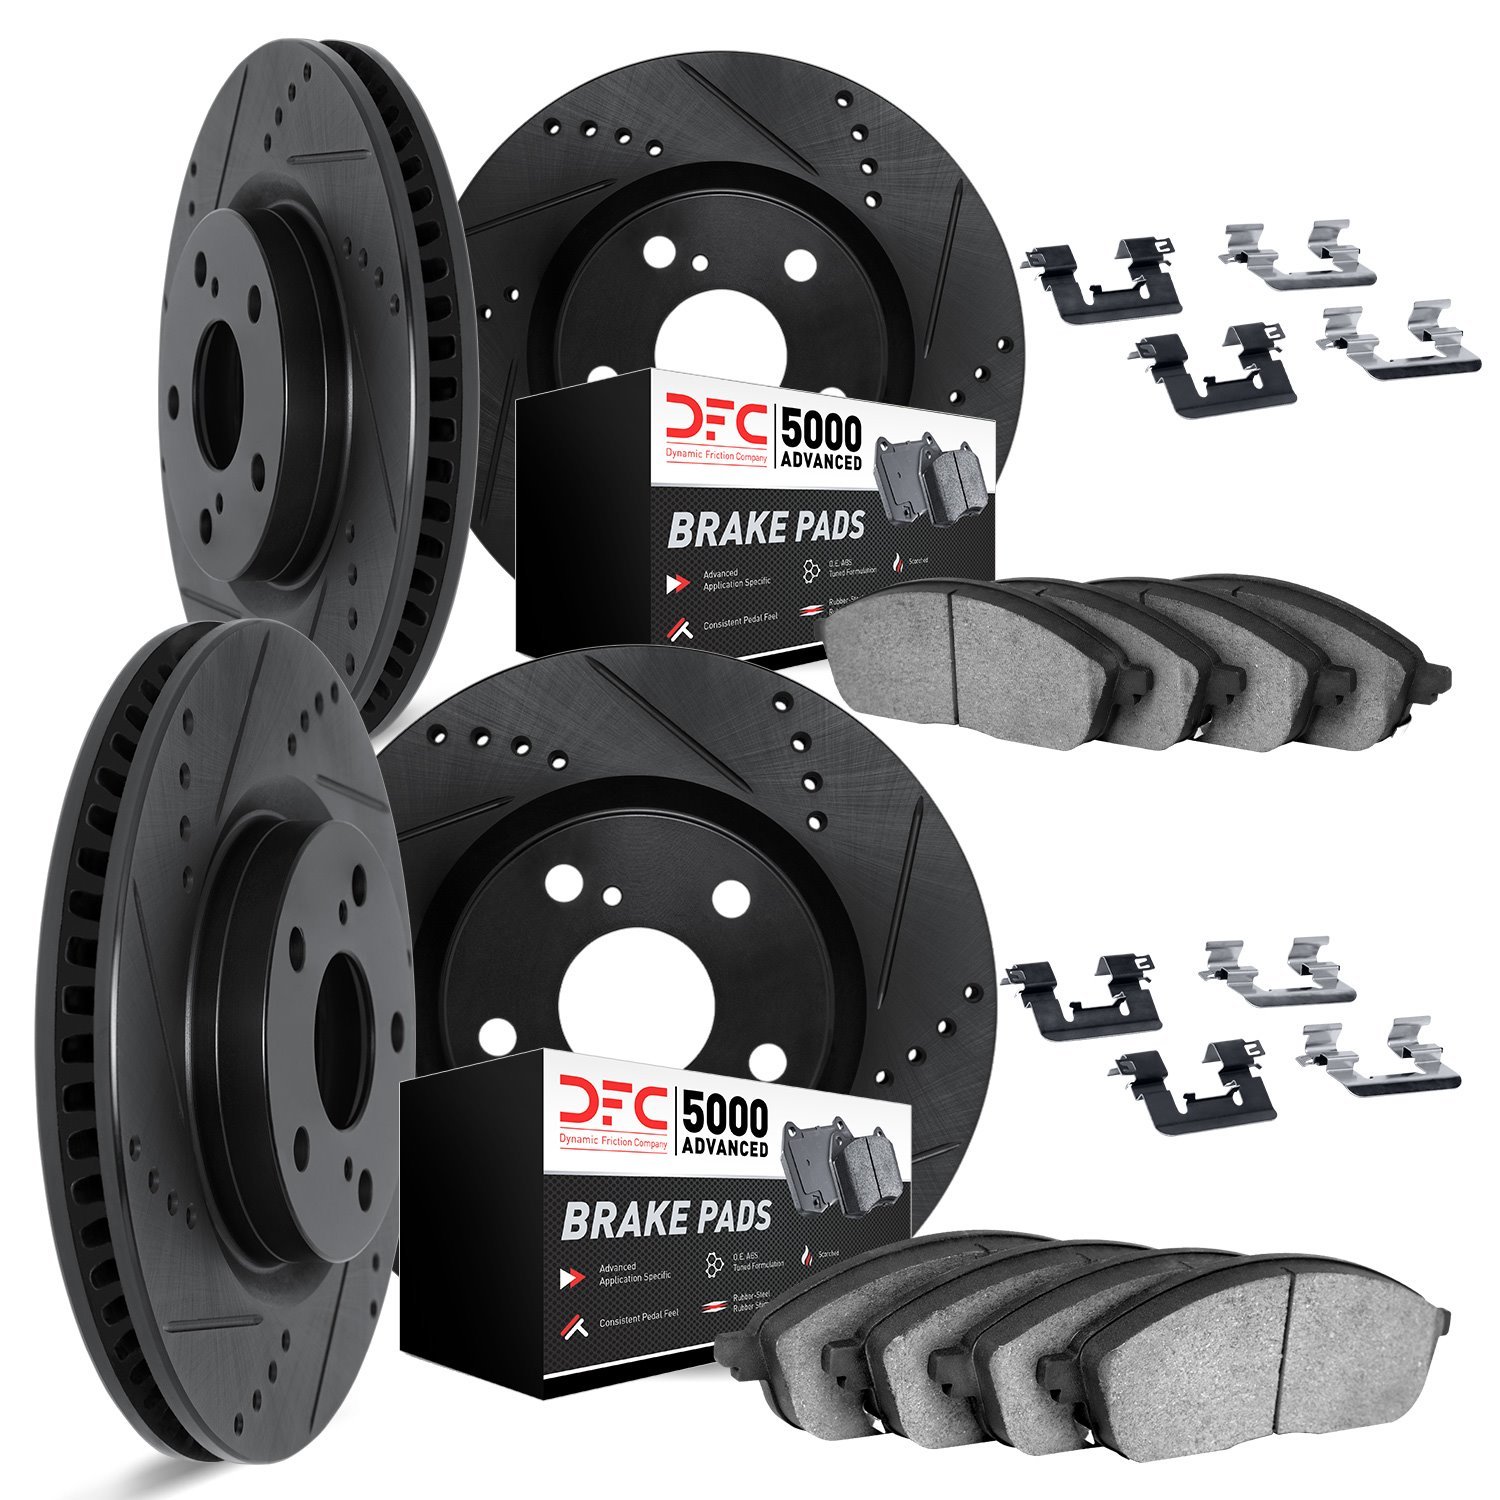 8514-31060 Drilled/Slotted Brake Rotors w/5000 Advanced Brake Pads Kit & Hardware [Black], 2007-2014 BMW, Position: Front and Re